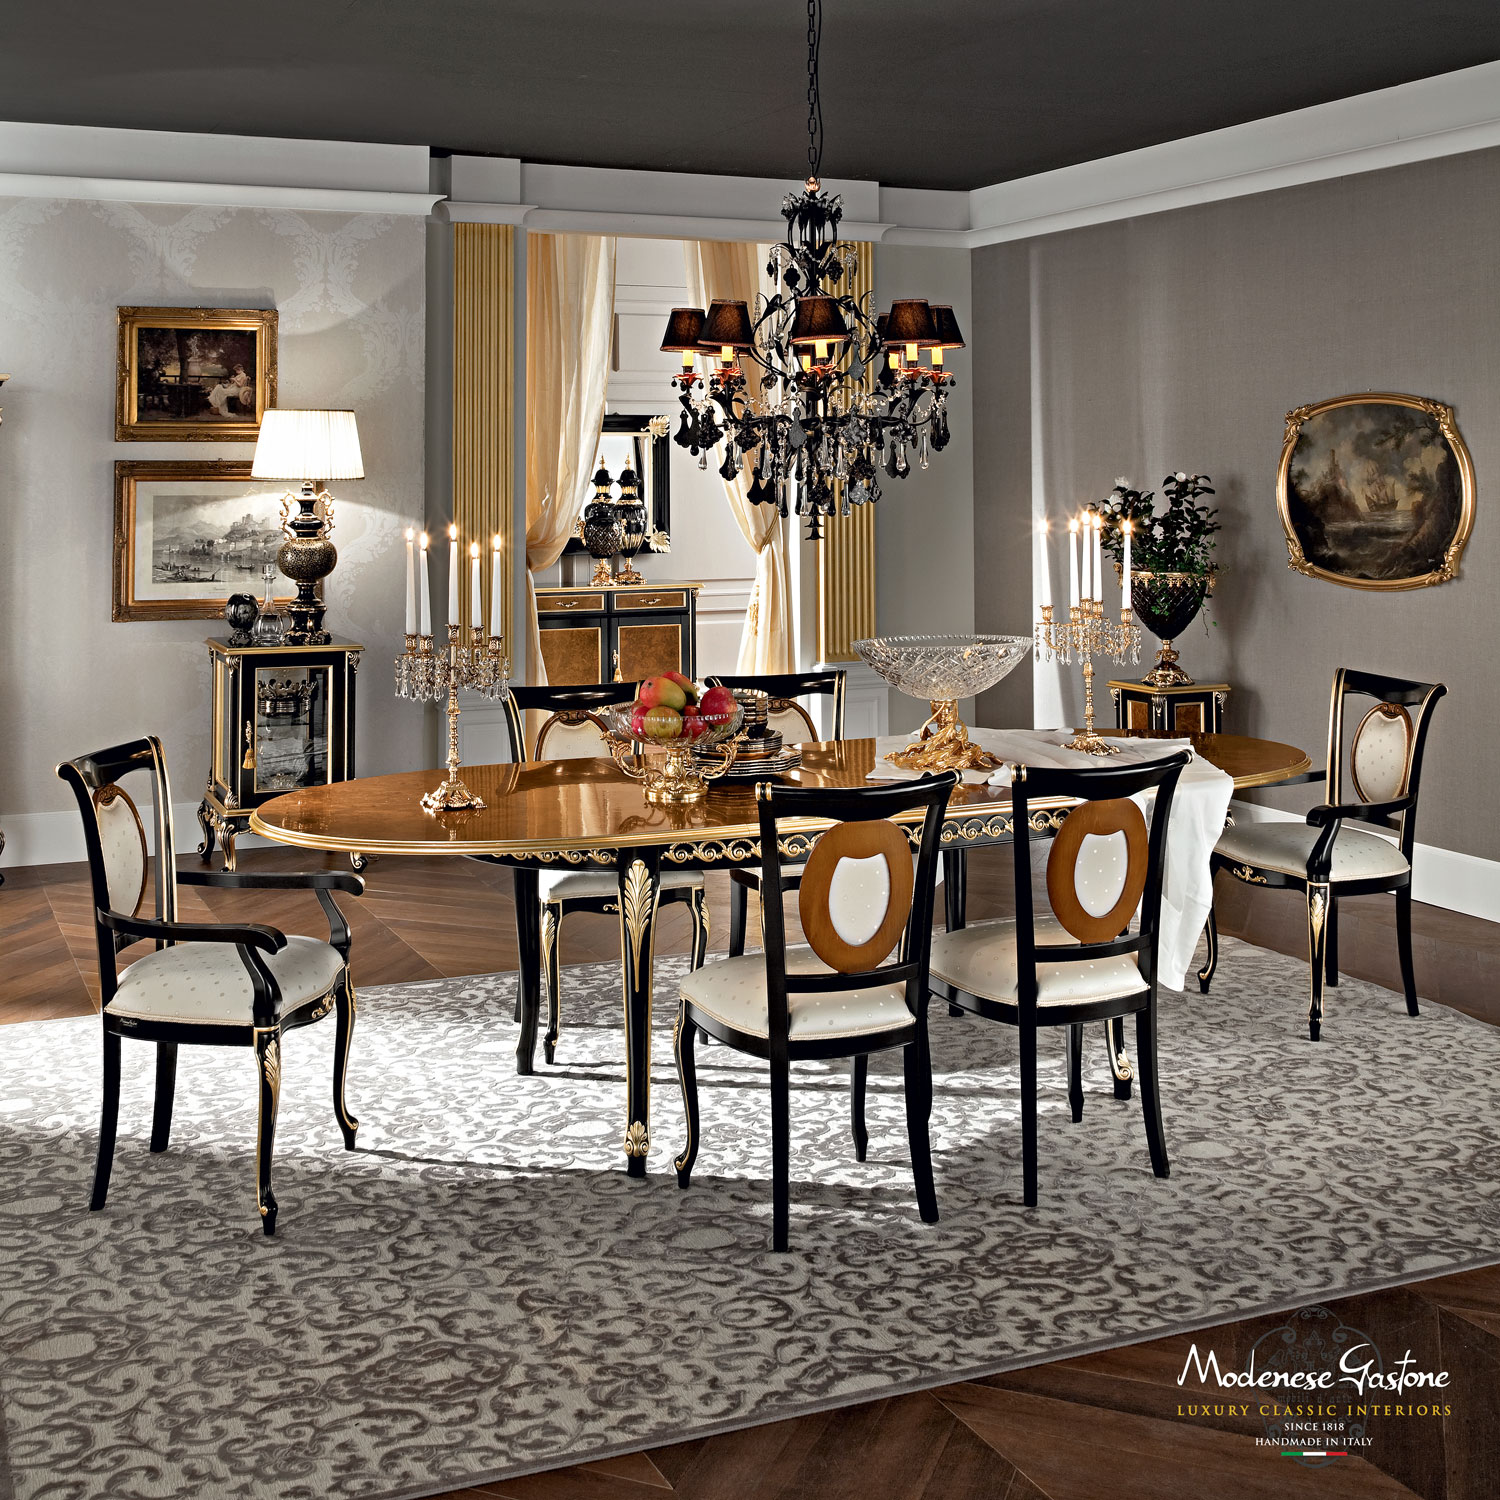 Classical-dining-room-with-extendable-hardwood-table-Casanova-collection-Modenese-Gastone